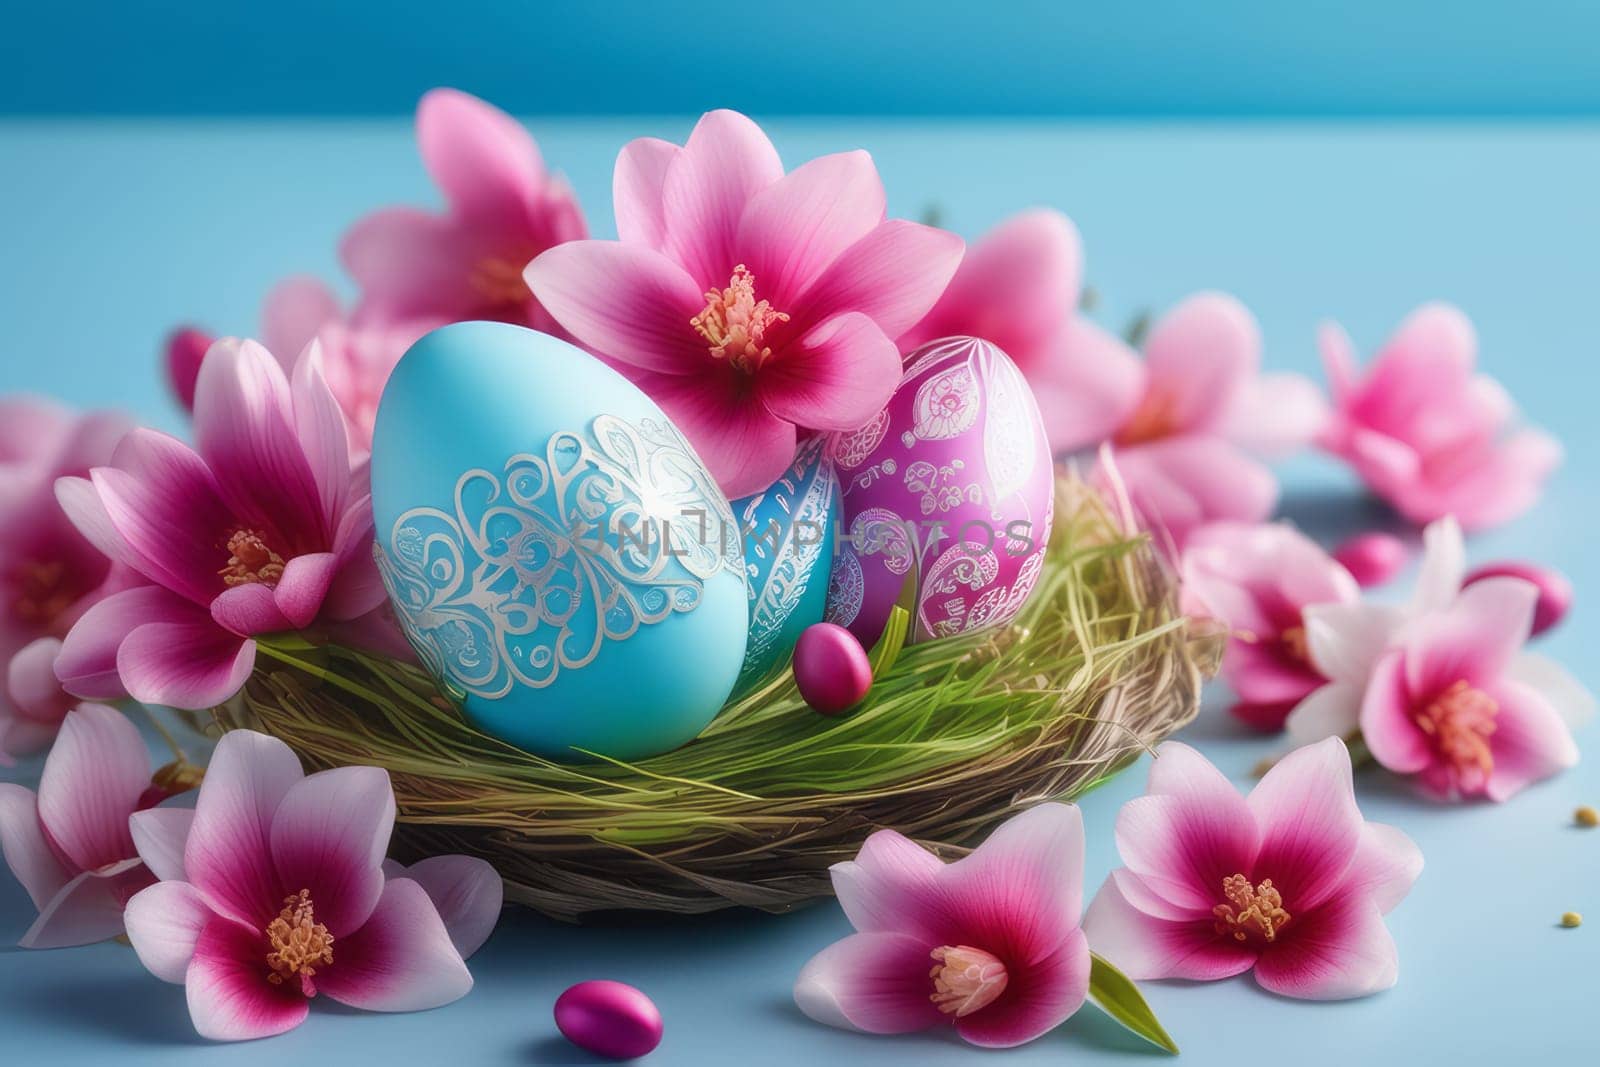 Colorful Easter eggs and blooming pink flowers on light blue background